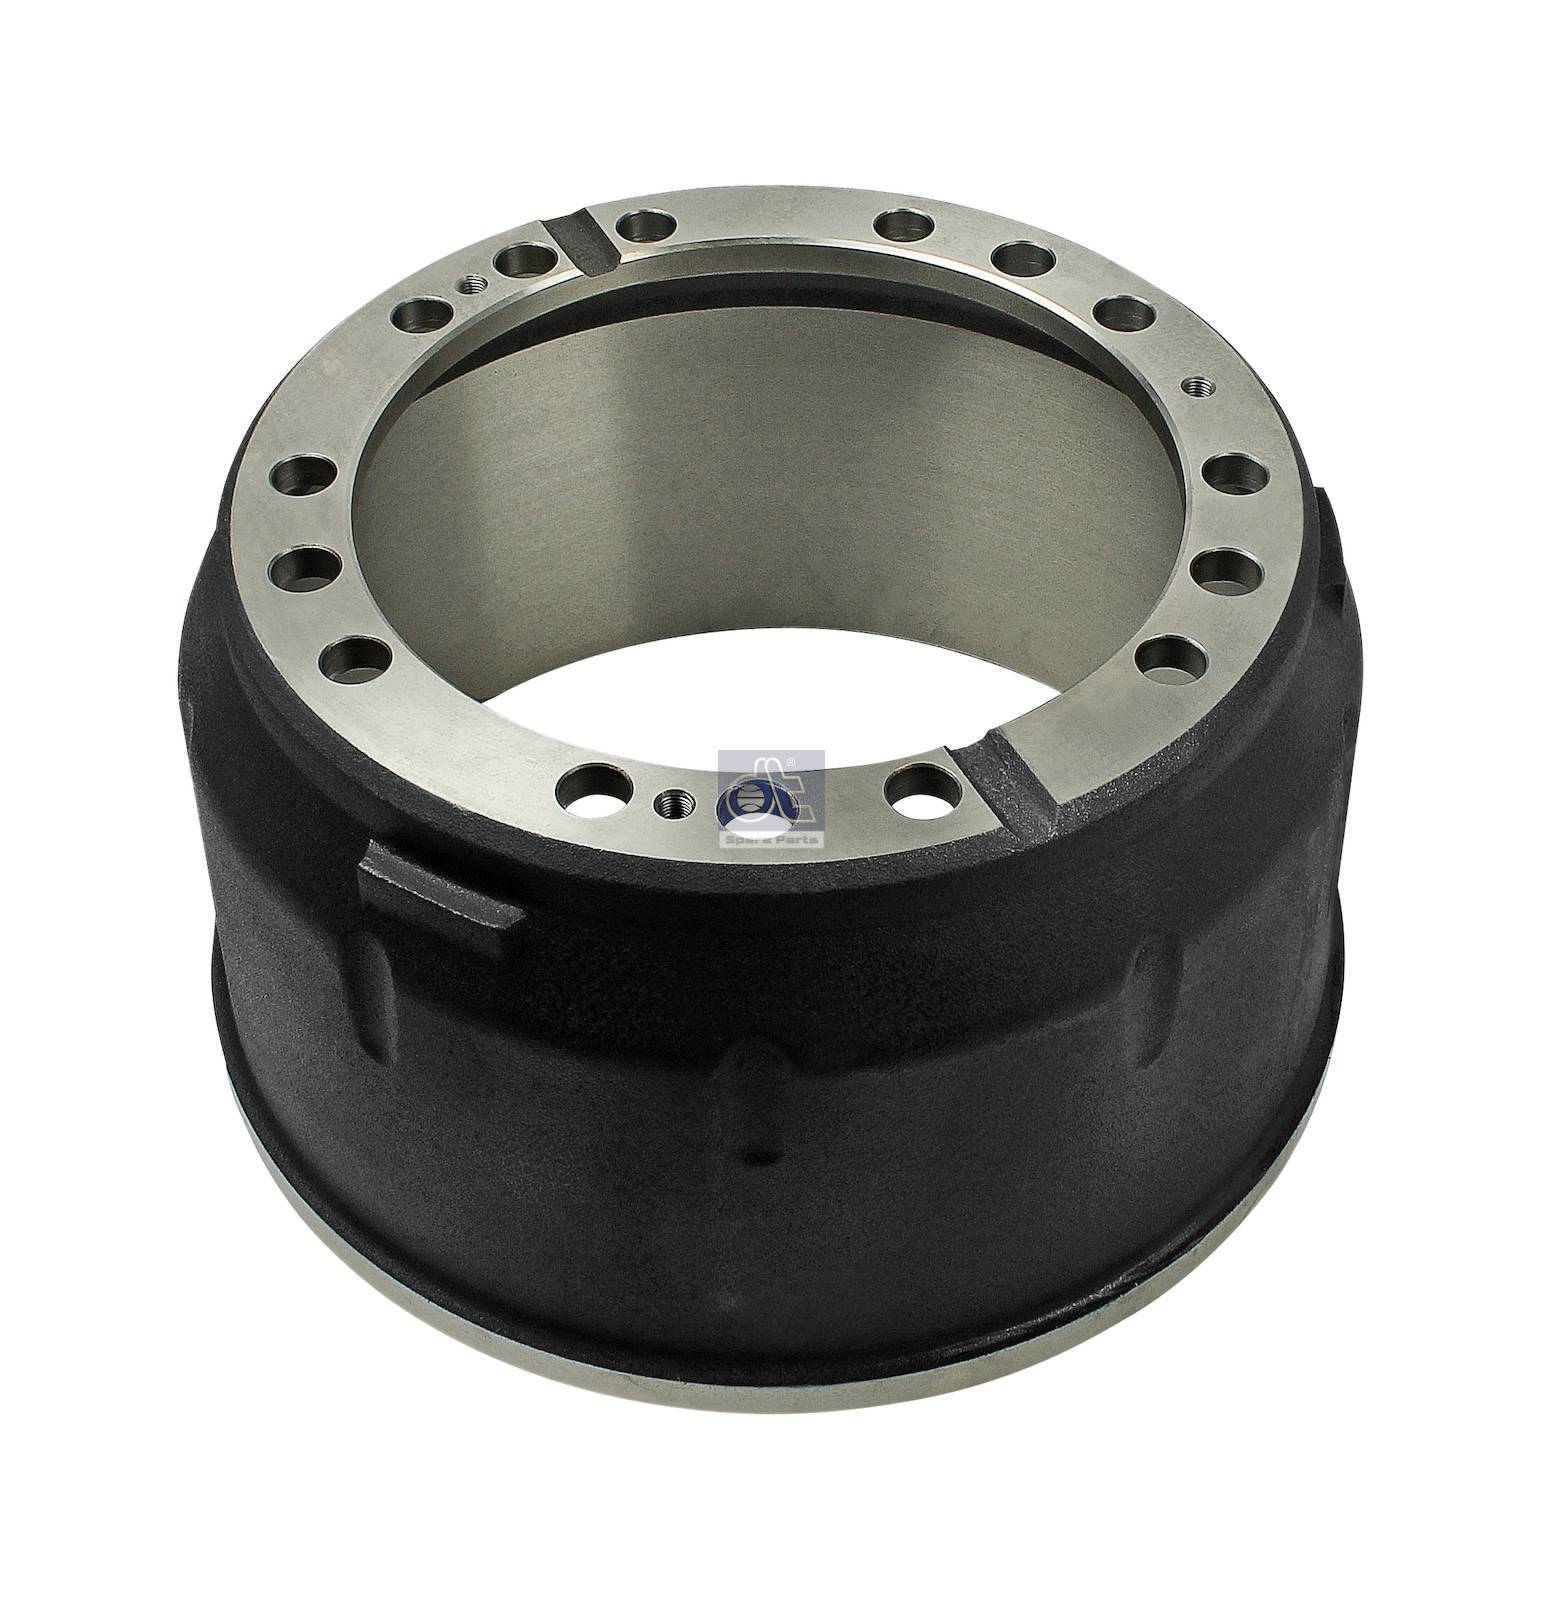 4.62956 Brake drum (D: 410 ,d: 298 mm,P: 335 mm,b: 23 mm,B: 193 mm,Fitting  Position: Front Axle ,for OE number: 658 421 0301 ,H: 260 mm,Number of  Holes: 10 )